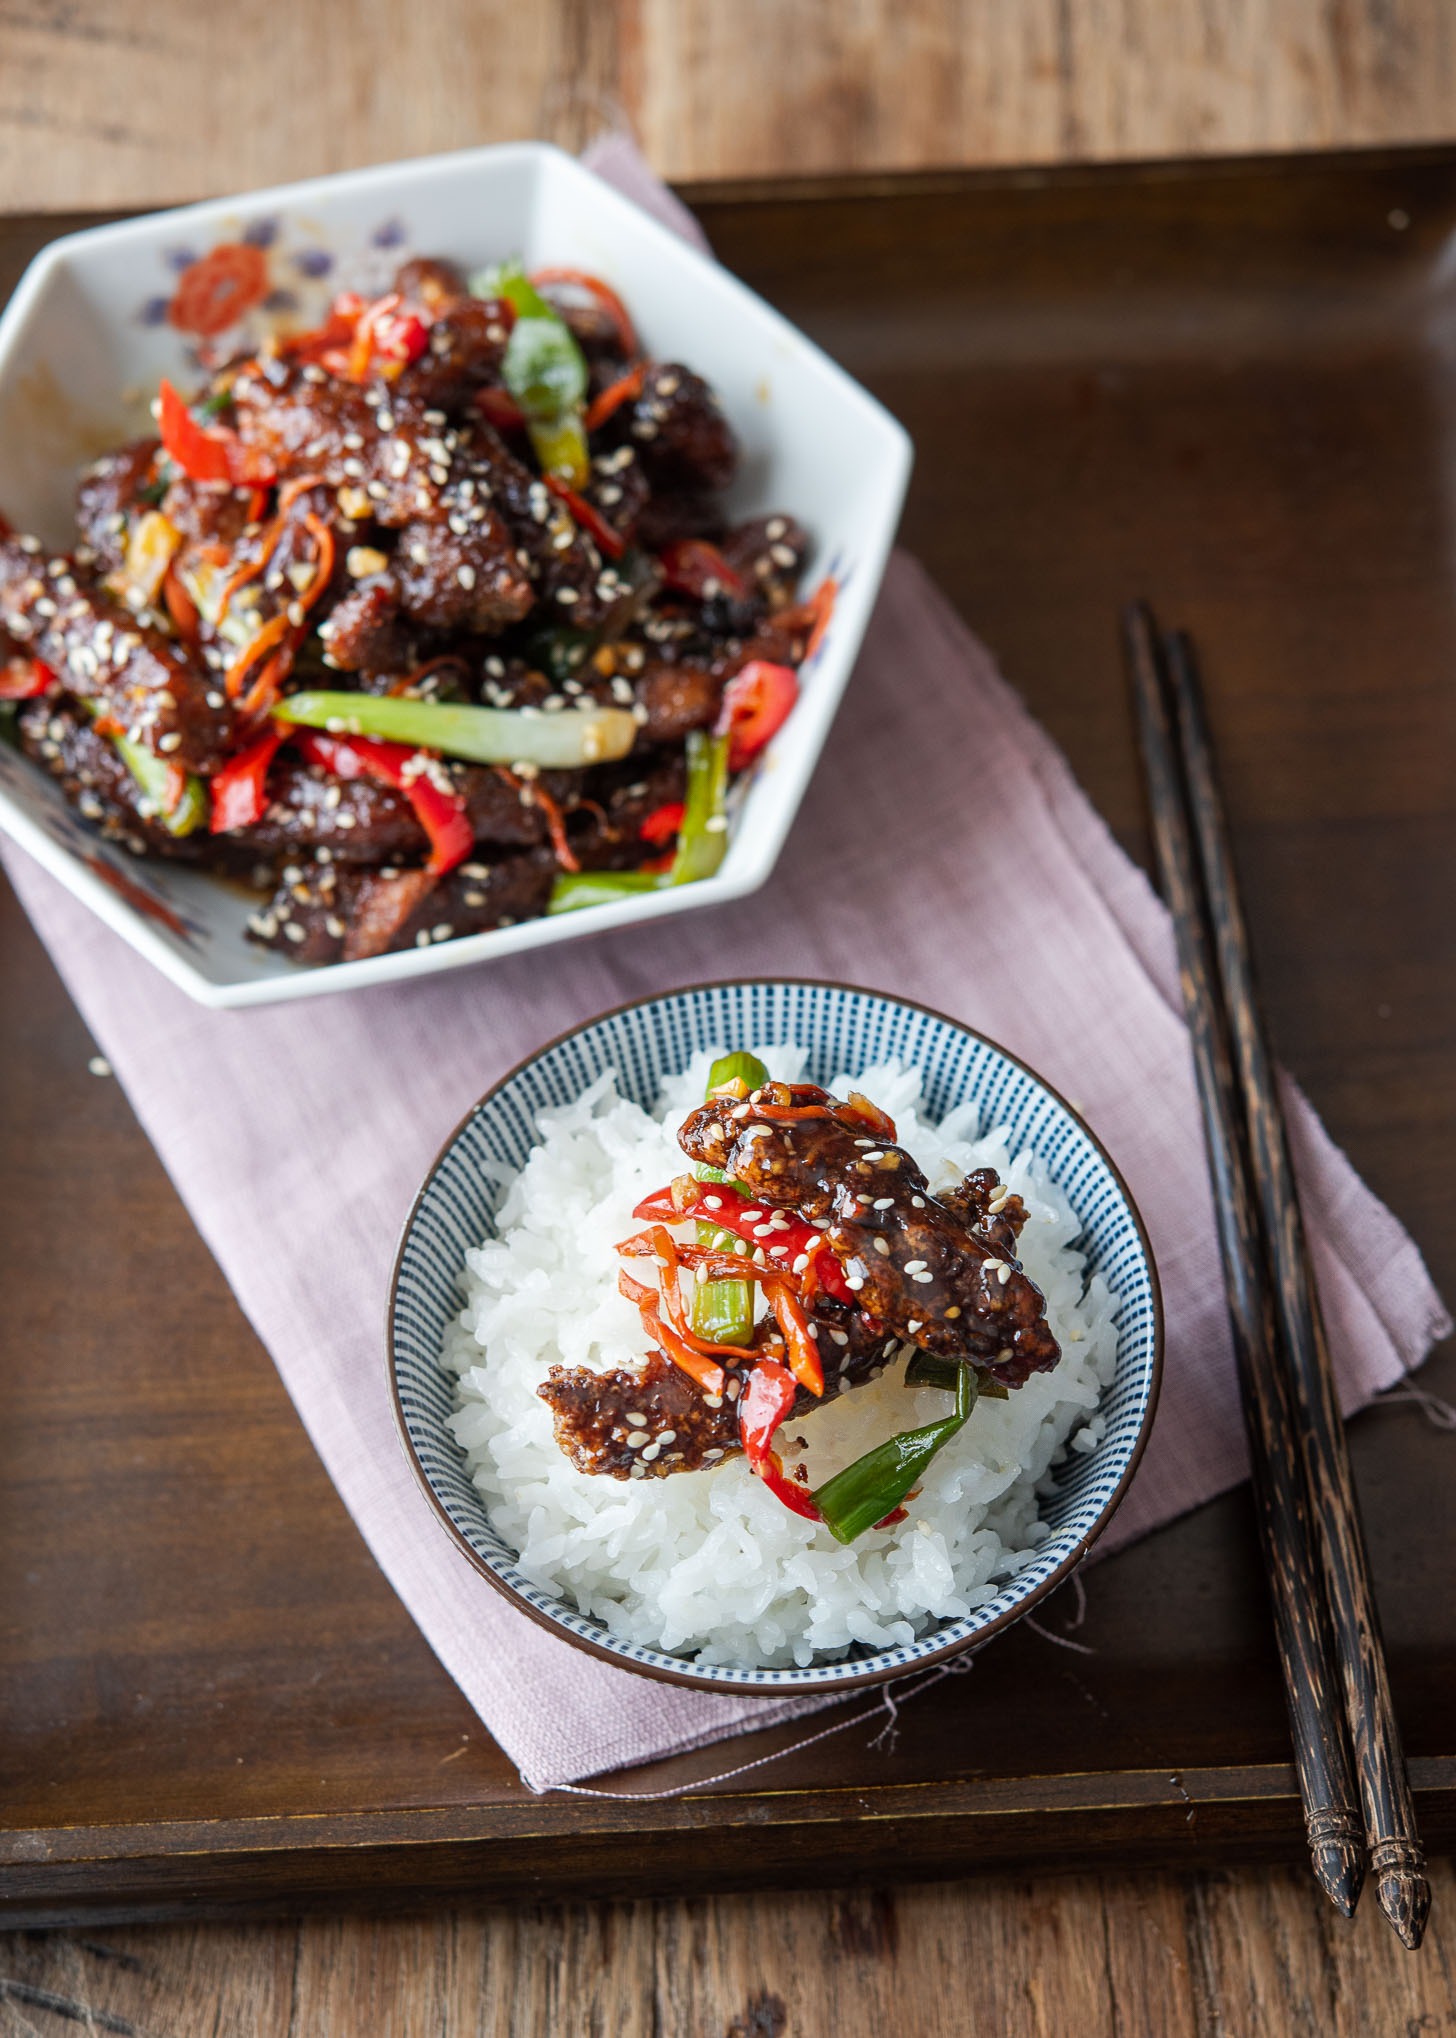 Crispy Chinese beef is served over a bowl of rice.